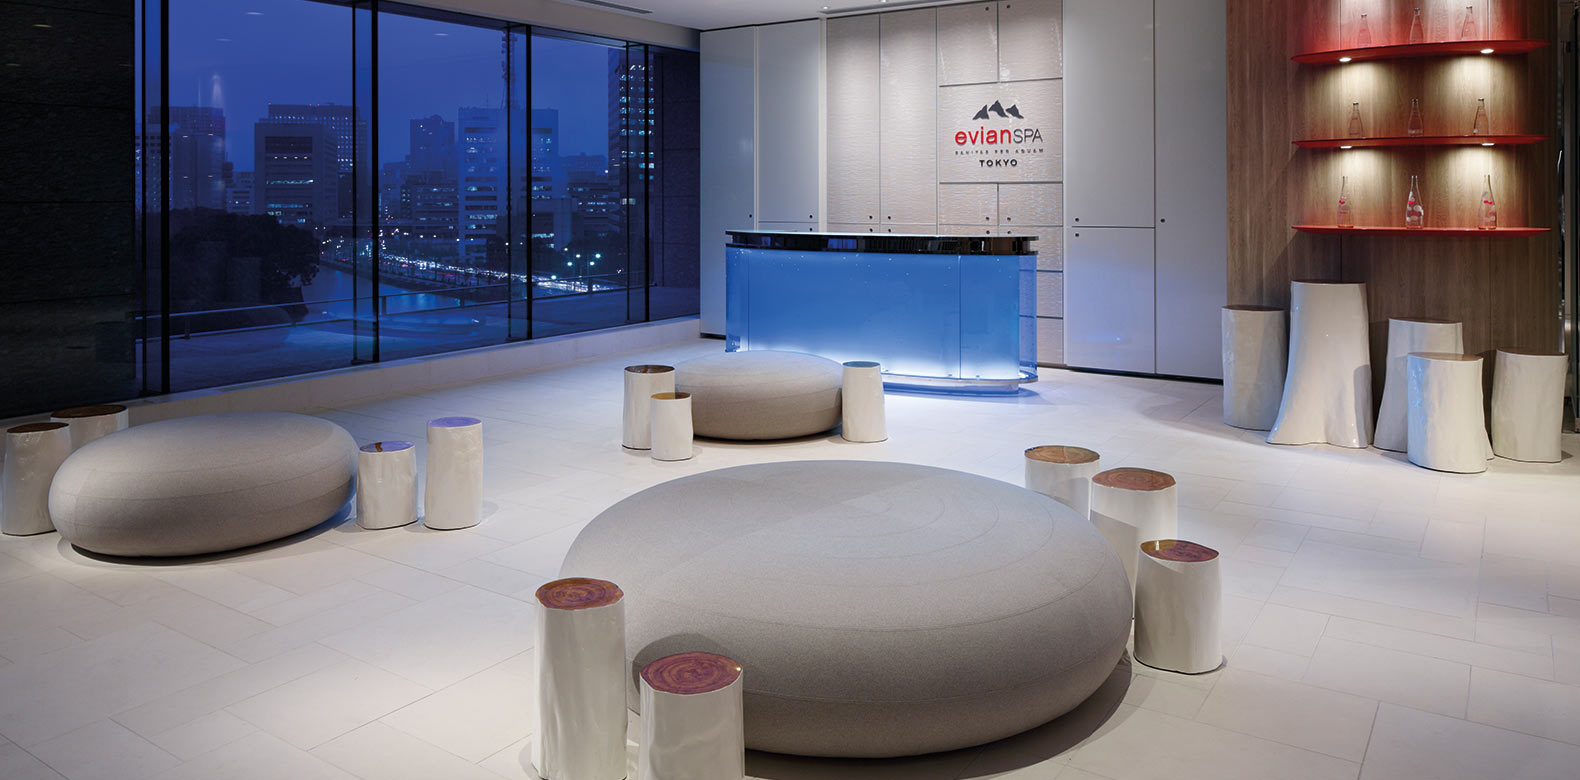 Palace Hotel Tokyo | Palace Hotel Opens First Evian Spa in Japan